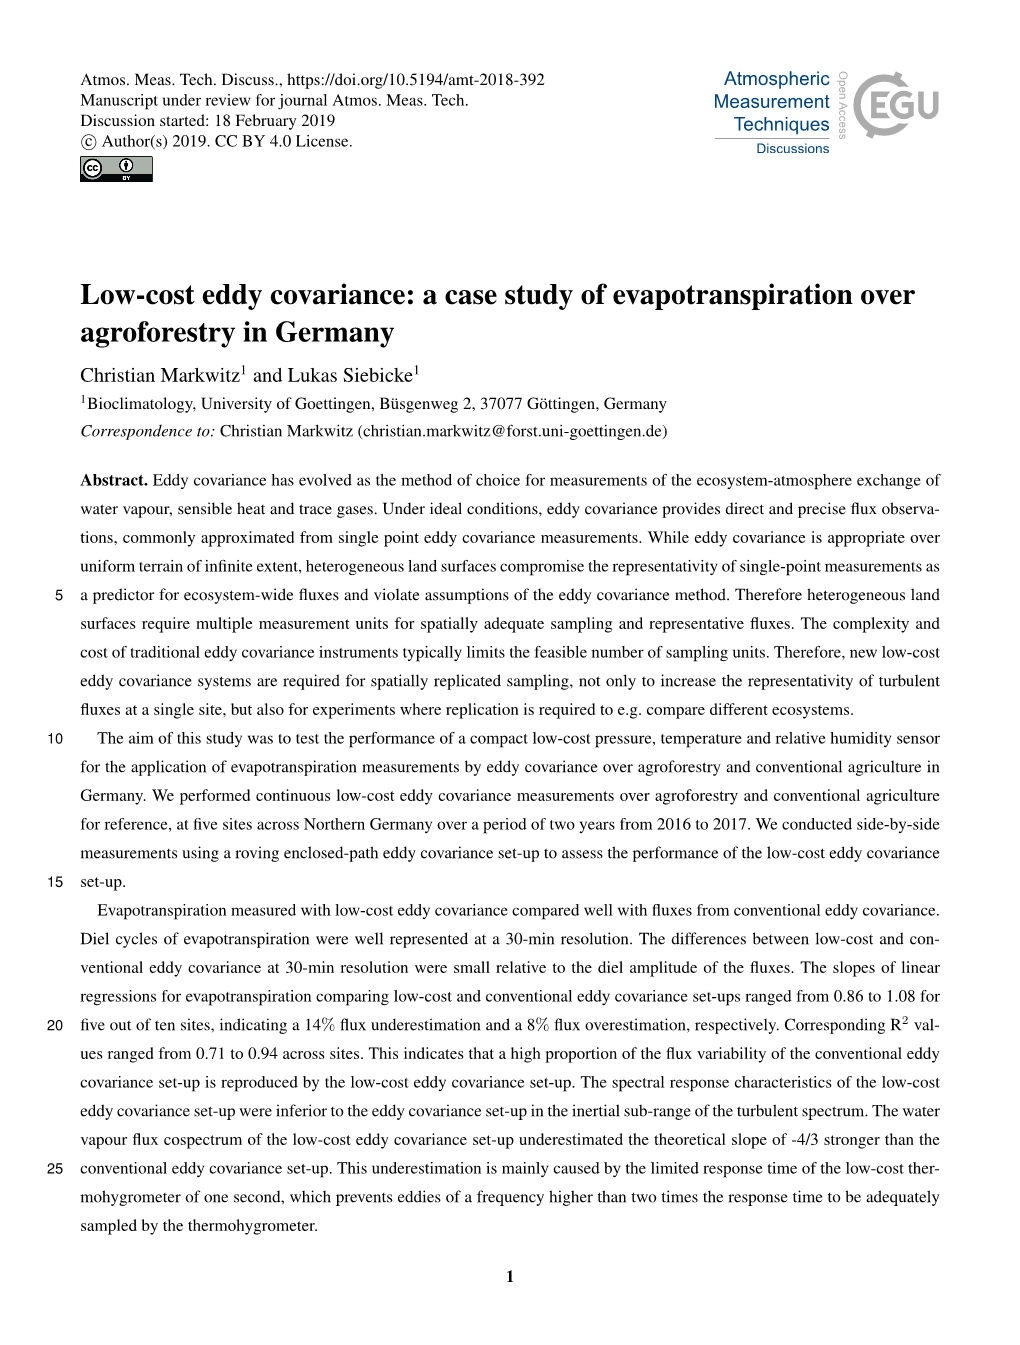 Low-Cost Eddy Covariance: a Case Study of Evapotranspiration Over Agroforestry in Germany